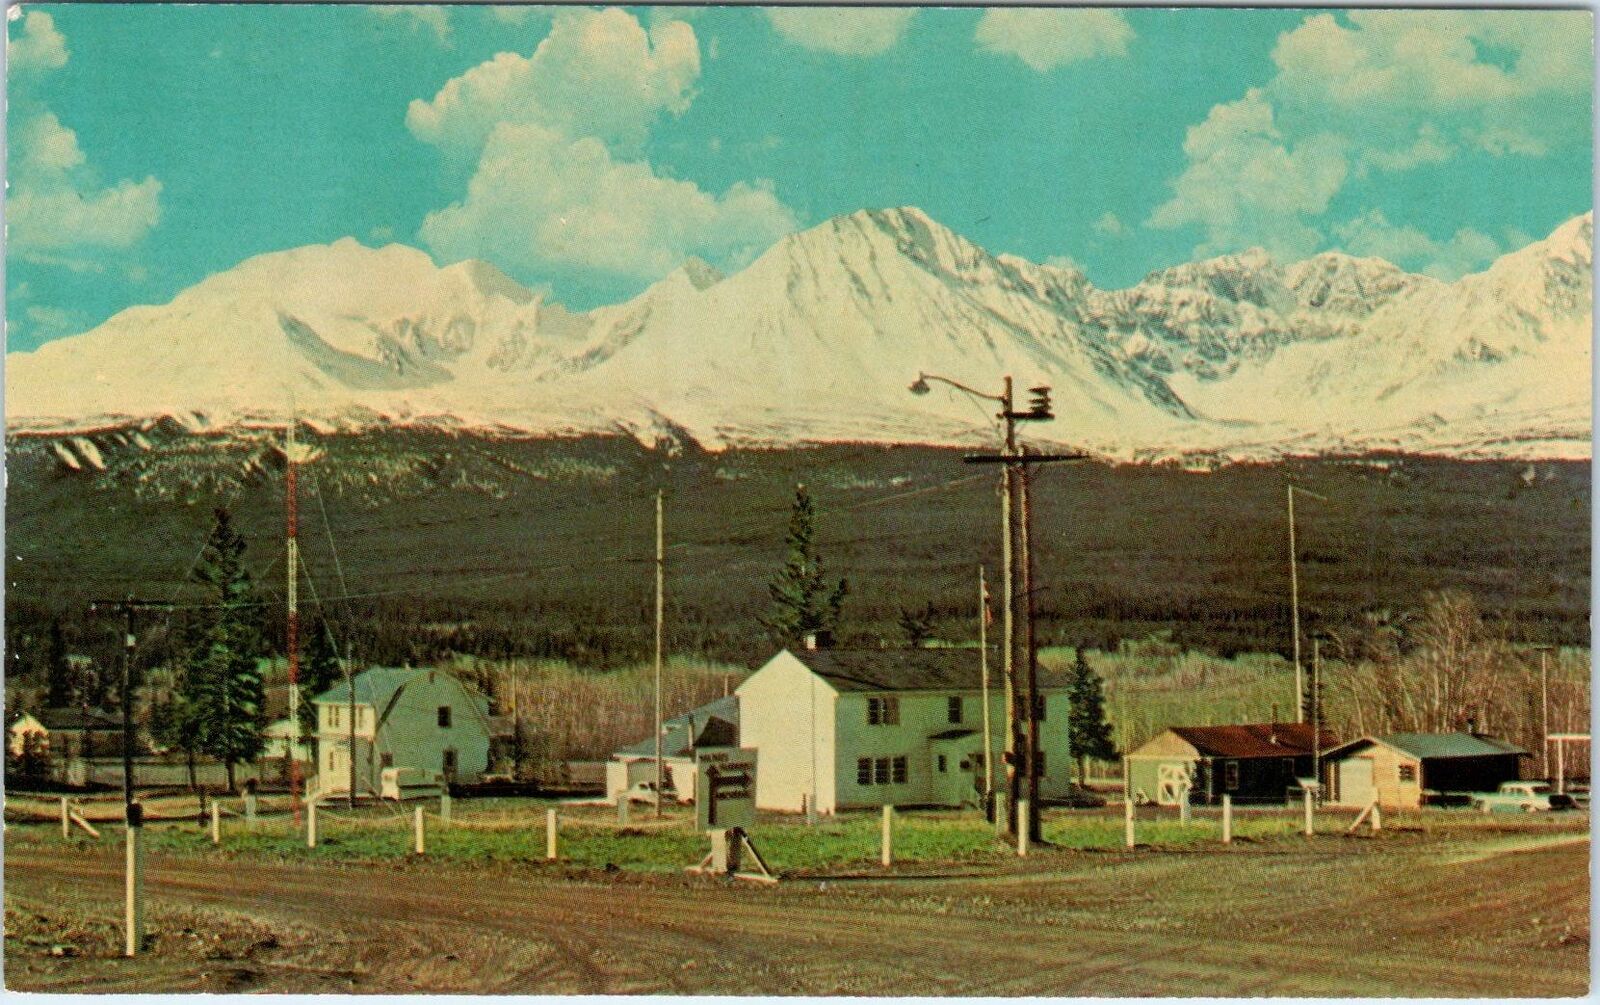 HAINES JUNCTION, Yukon Canada  View of TOWN, ST ELIAS MTNS   c1950s  Postcard